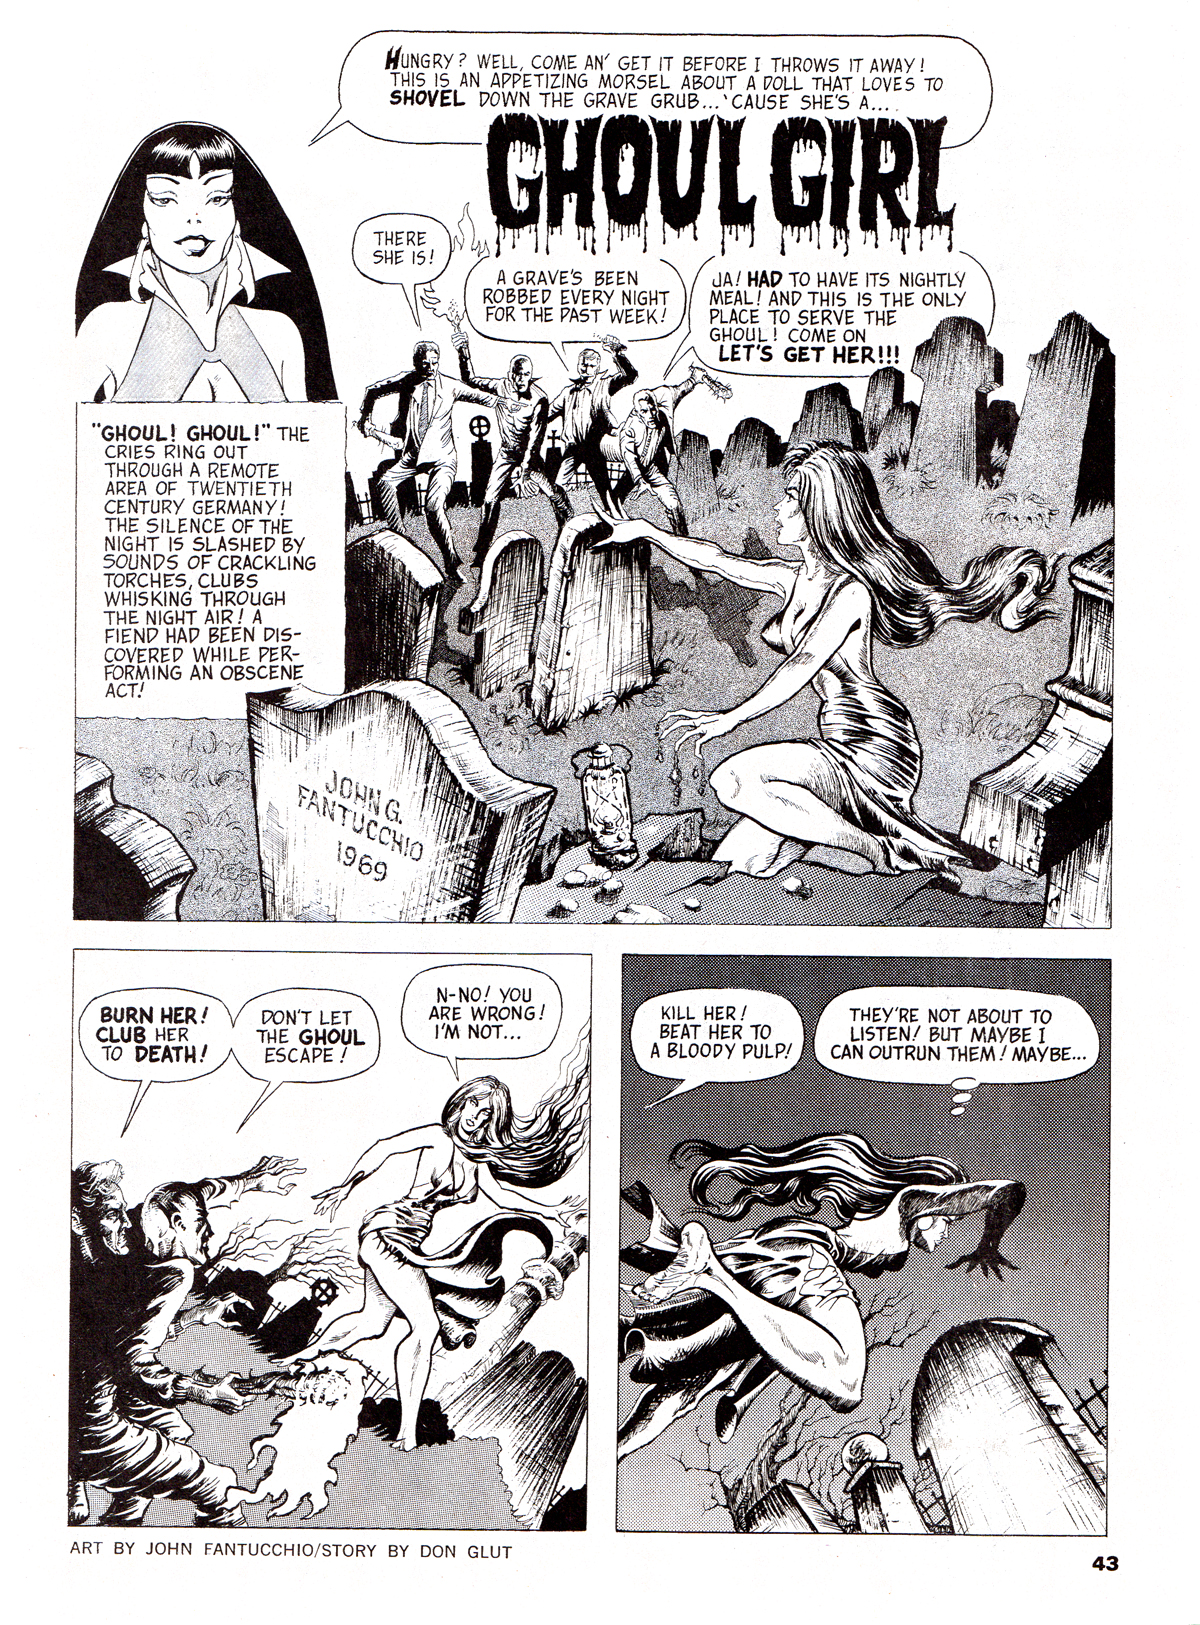 Vampirella 5 with 6 page ''Ghoul Girl'' story with art by John G. Fantucchio